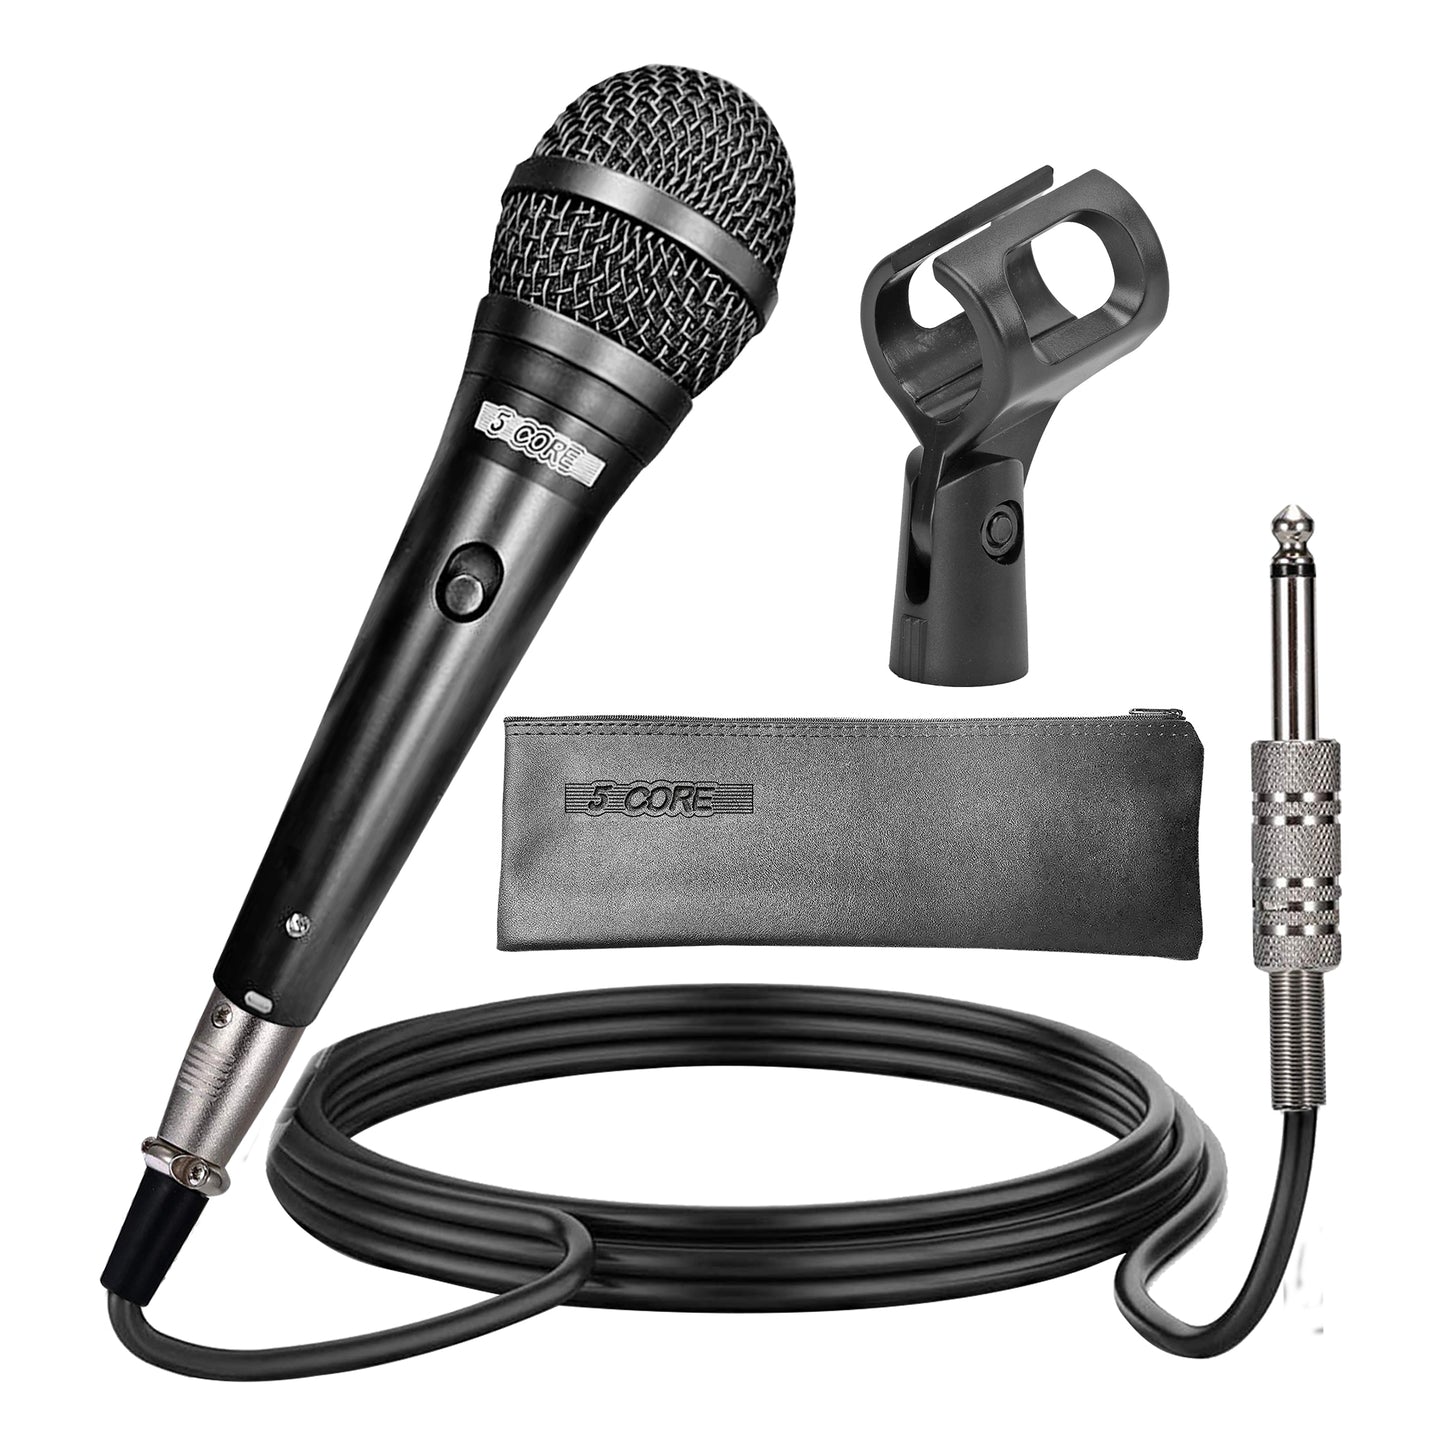 5 Core Professional Dynamic Vocal Microphone - Unidirectional Handheld Mic XLR Karaoke Microphone with ON/OFF Switch Includes 16ft XLR Audio Cable to 1/4'' Audio Jack Included - ND 58 BLK